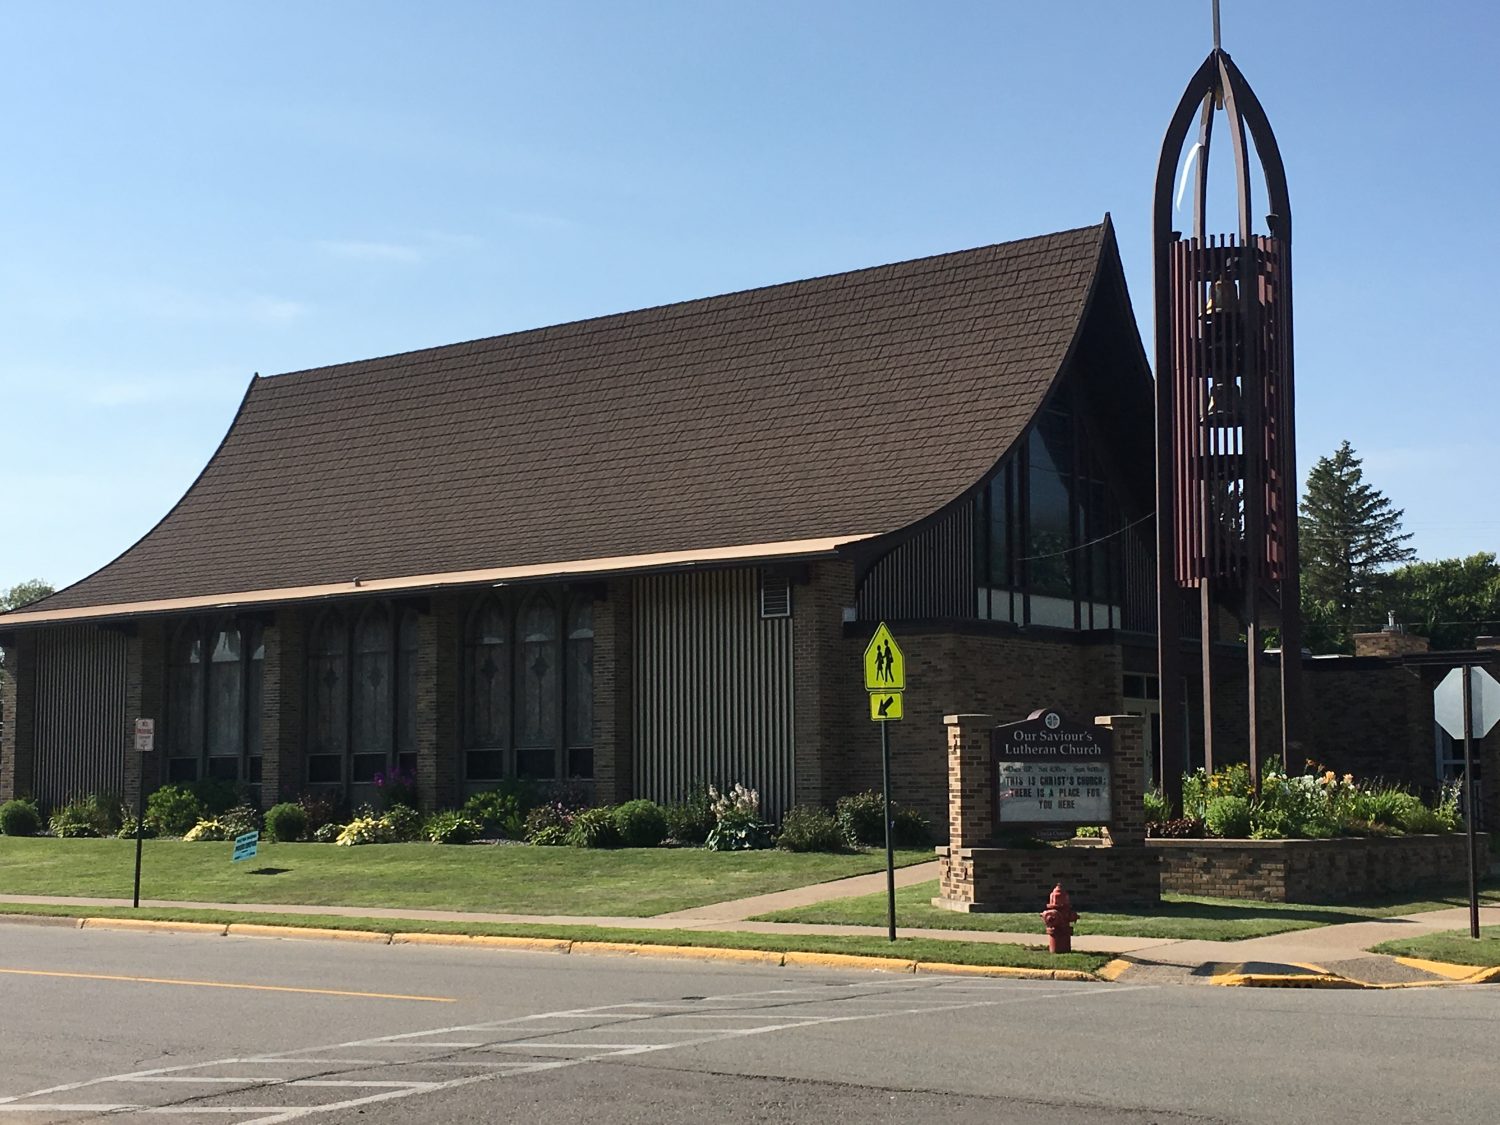 Our Saviour’s Lutheran Church to host Quilting Day